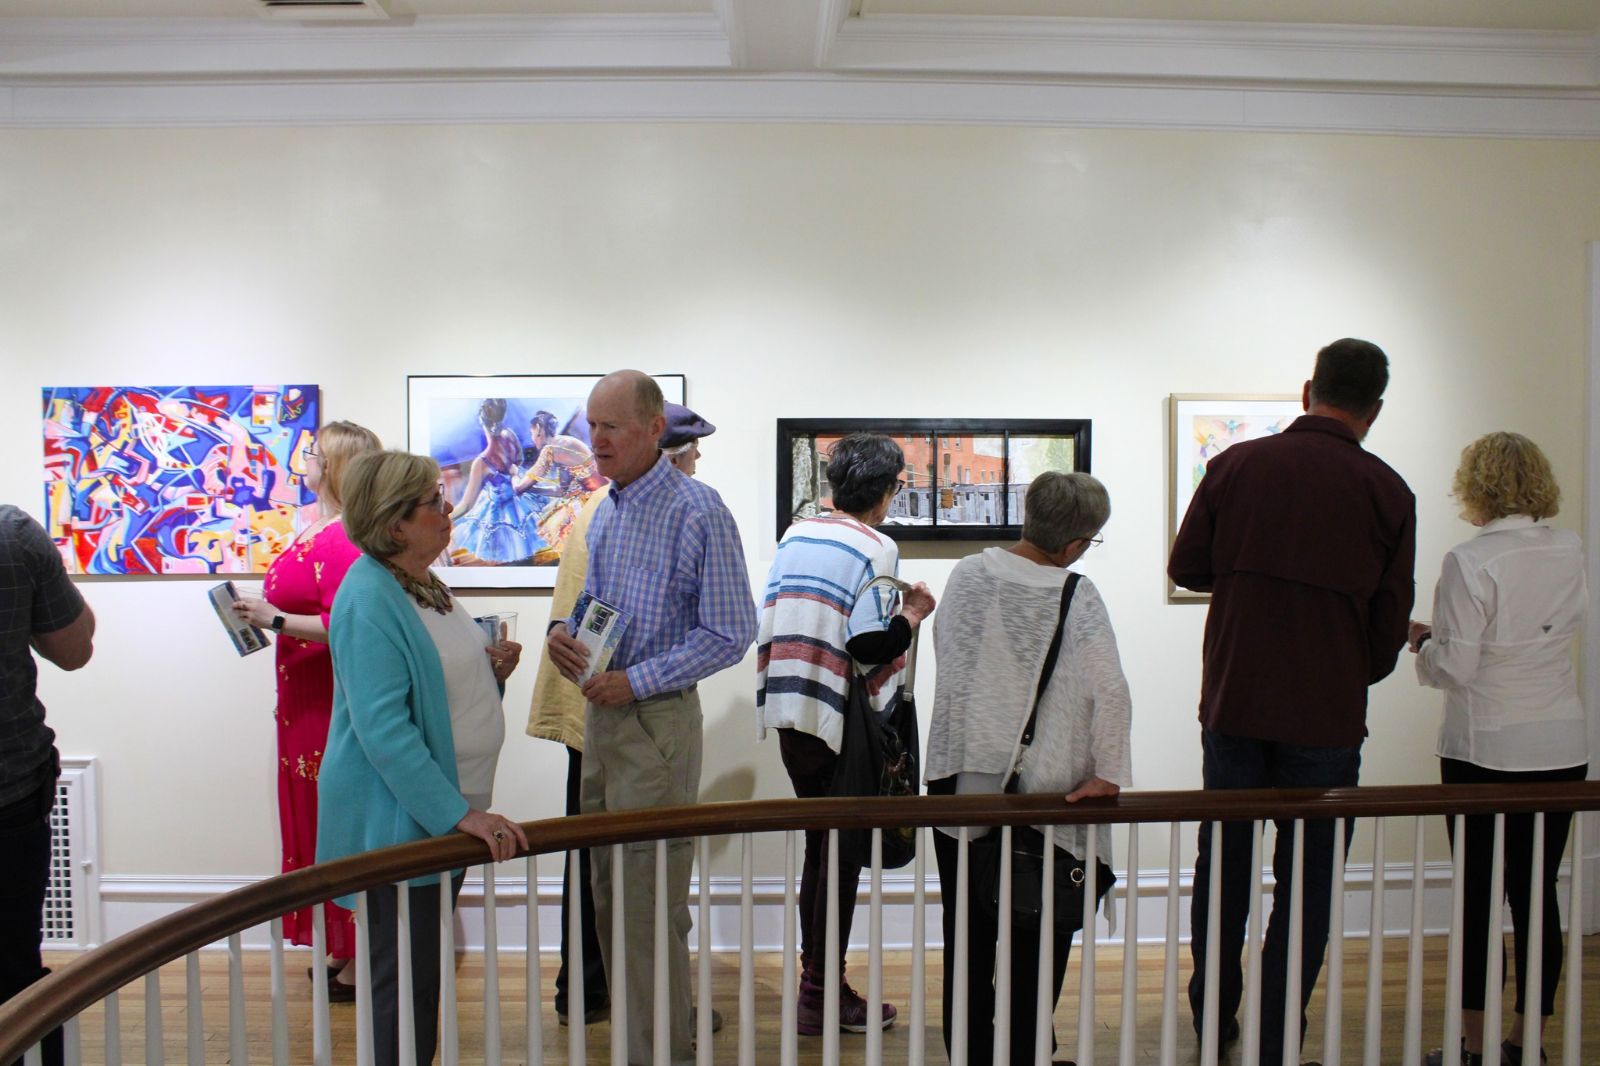 People look at art on the walls of a gallery.